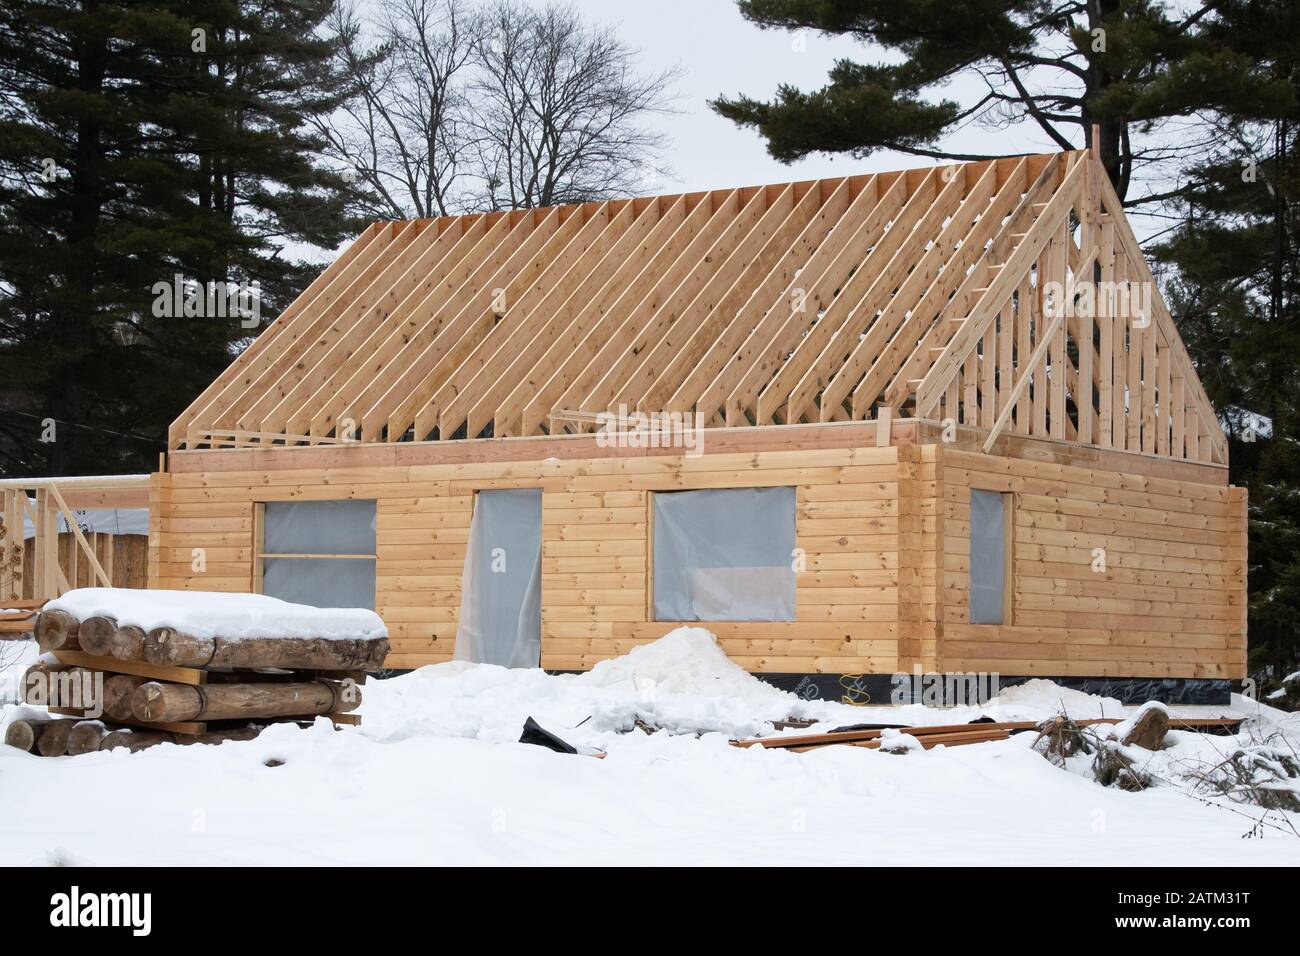 A prefabricated log home under construction during the winter in Speculator, NY USA in the Adirondack Mountains. Stock Photo